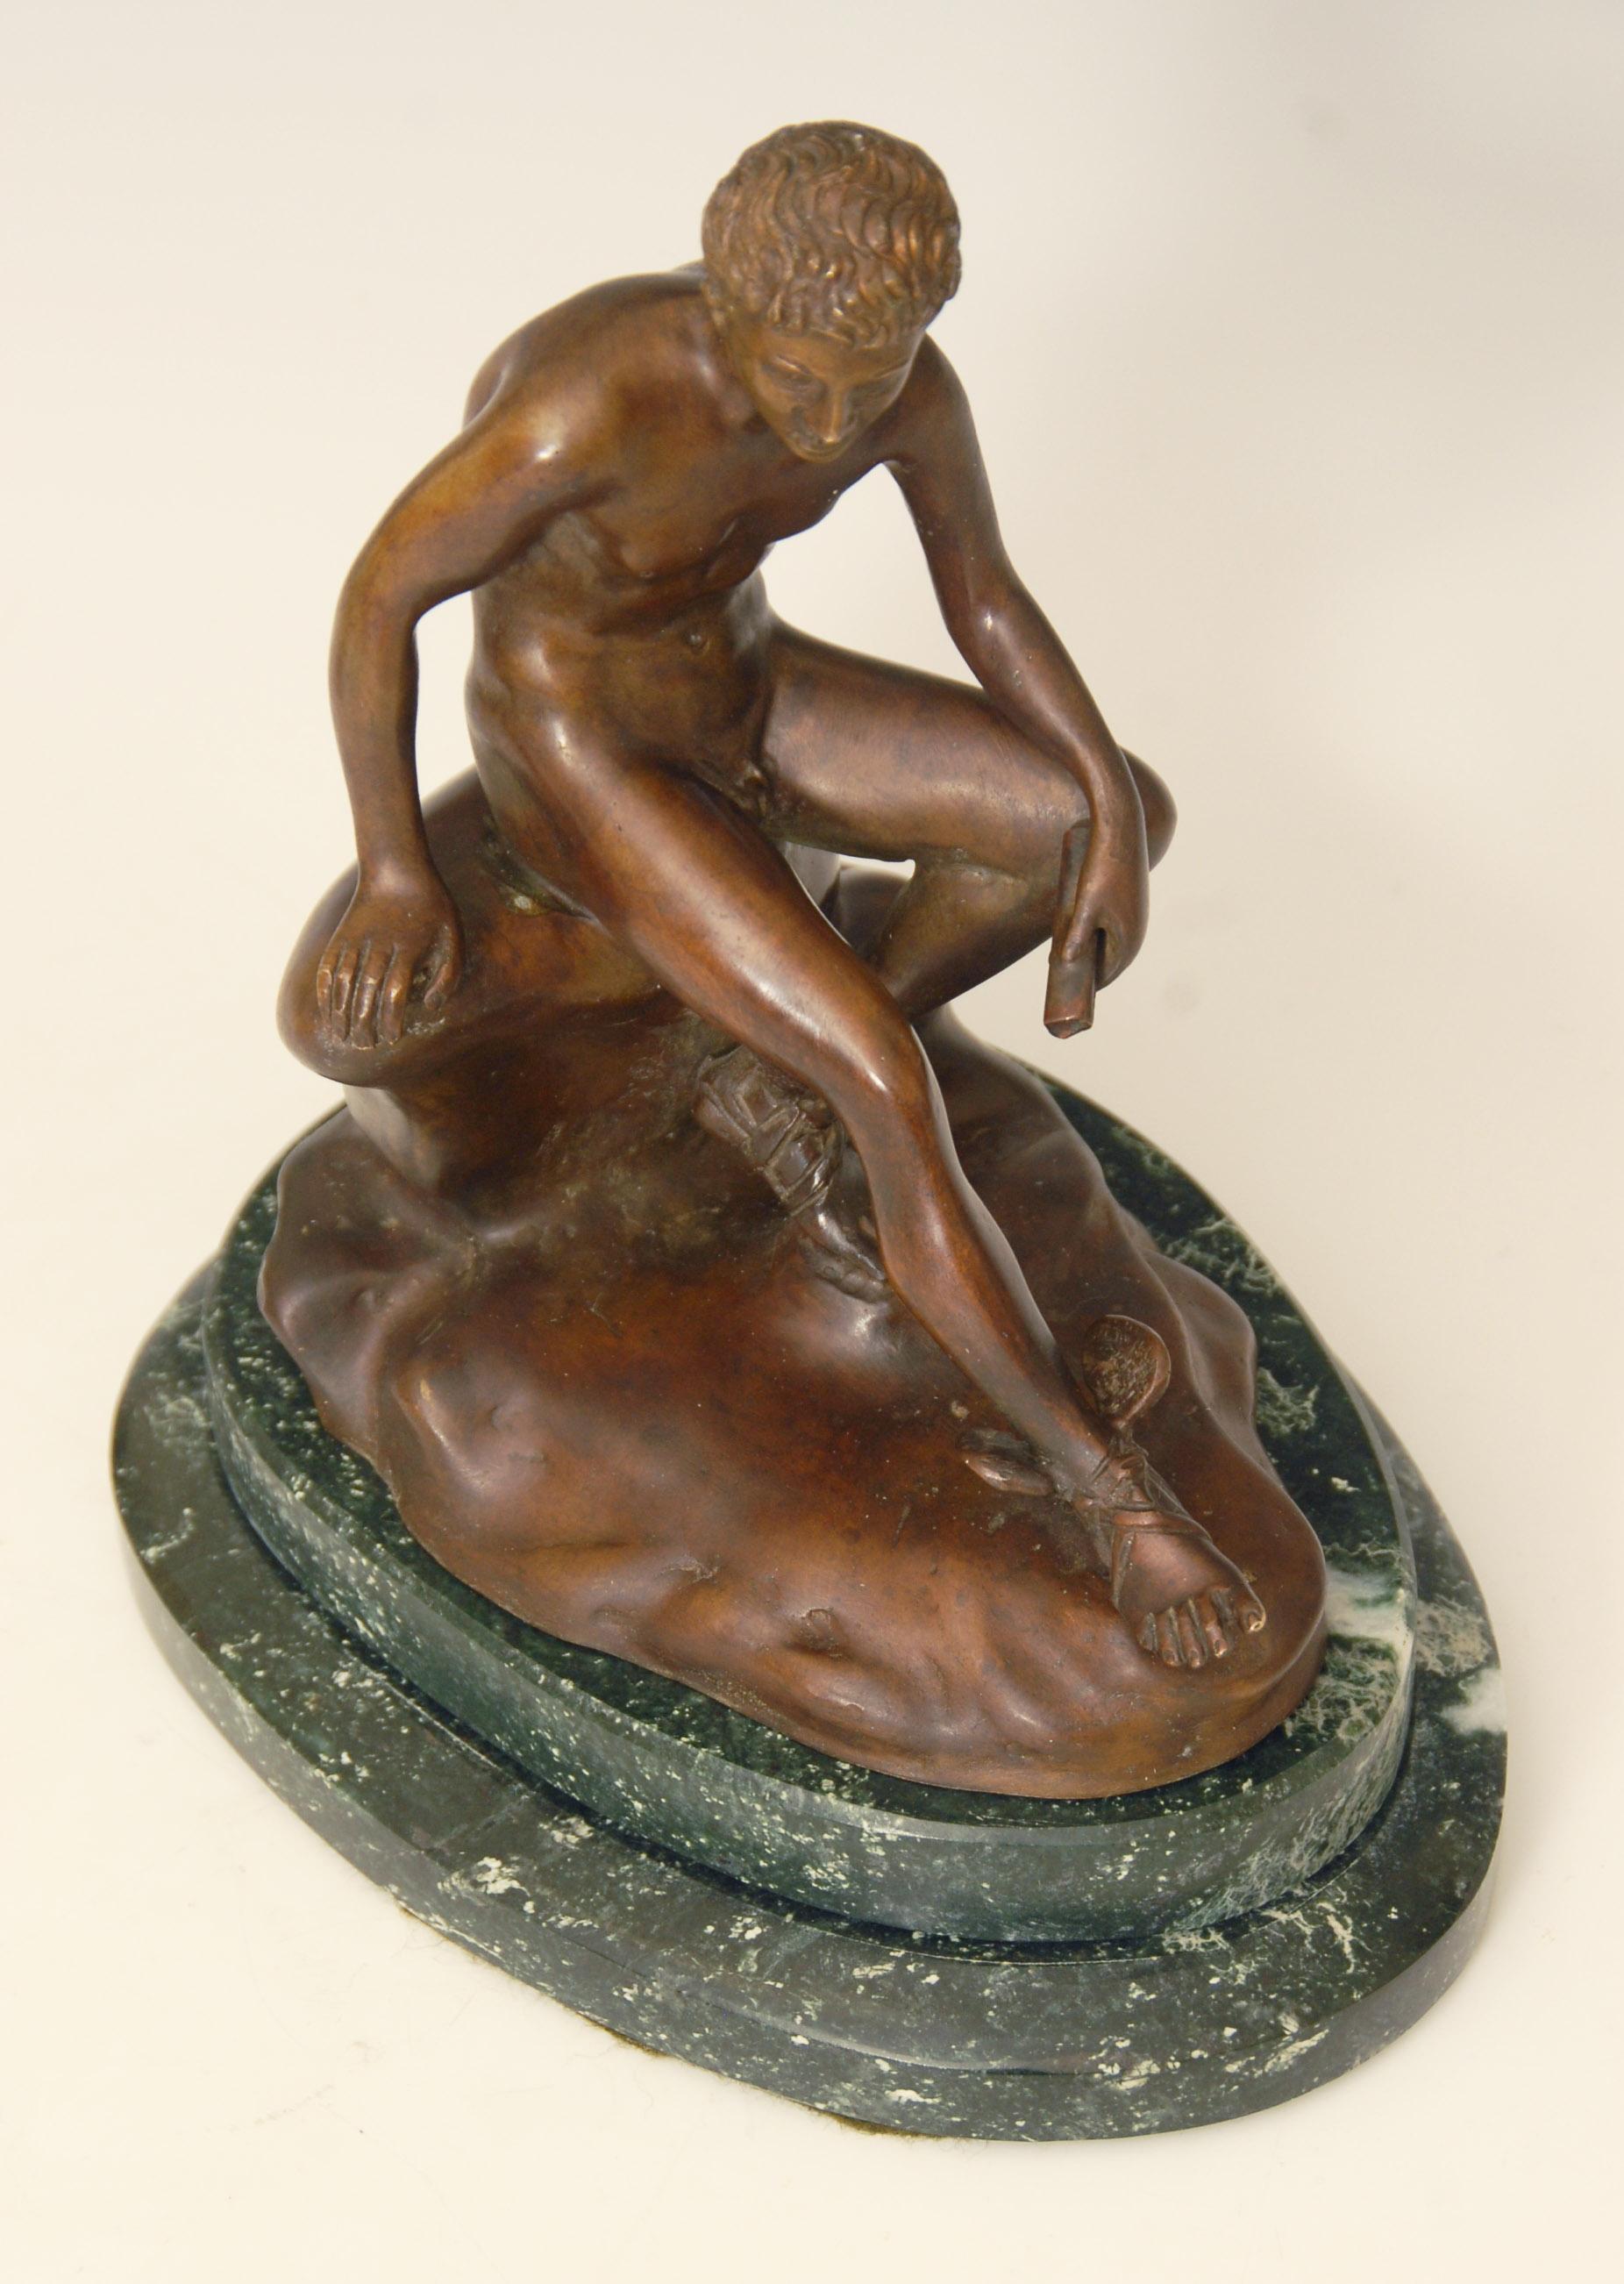 A superb Italian bronze circa 1890, of Hermes seated at rest on a green marble base.
Inscribed by the Chiurazzi Napoli foundry.
The original ancient Seated Hermes is now at the National Archaeological Museum of Naples and was found at the Villa of